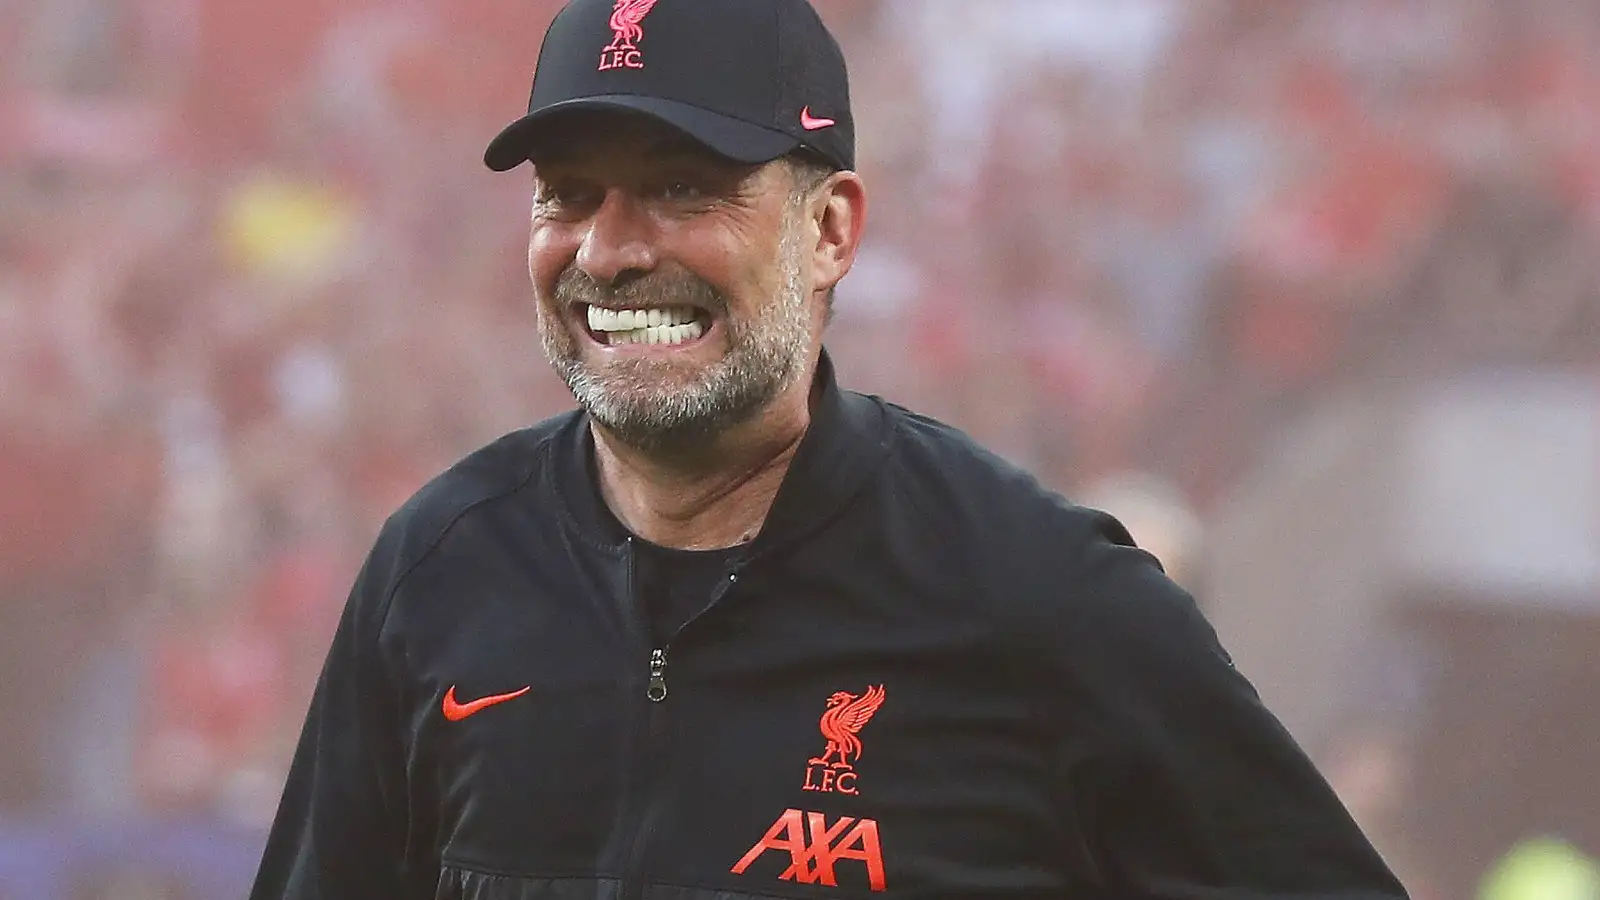 Liverpool manager Jurgen Klopp celebrates winning the FA Cup final in 2022.